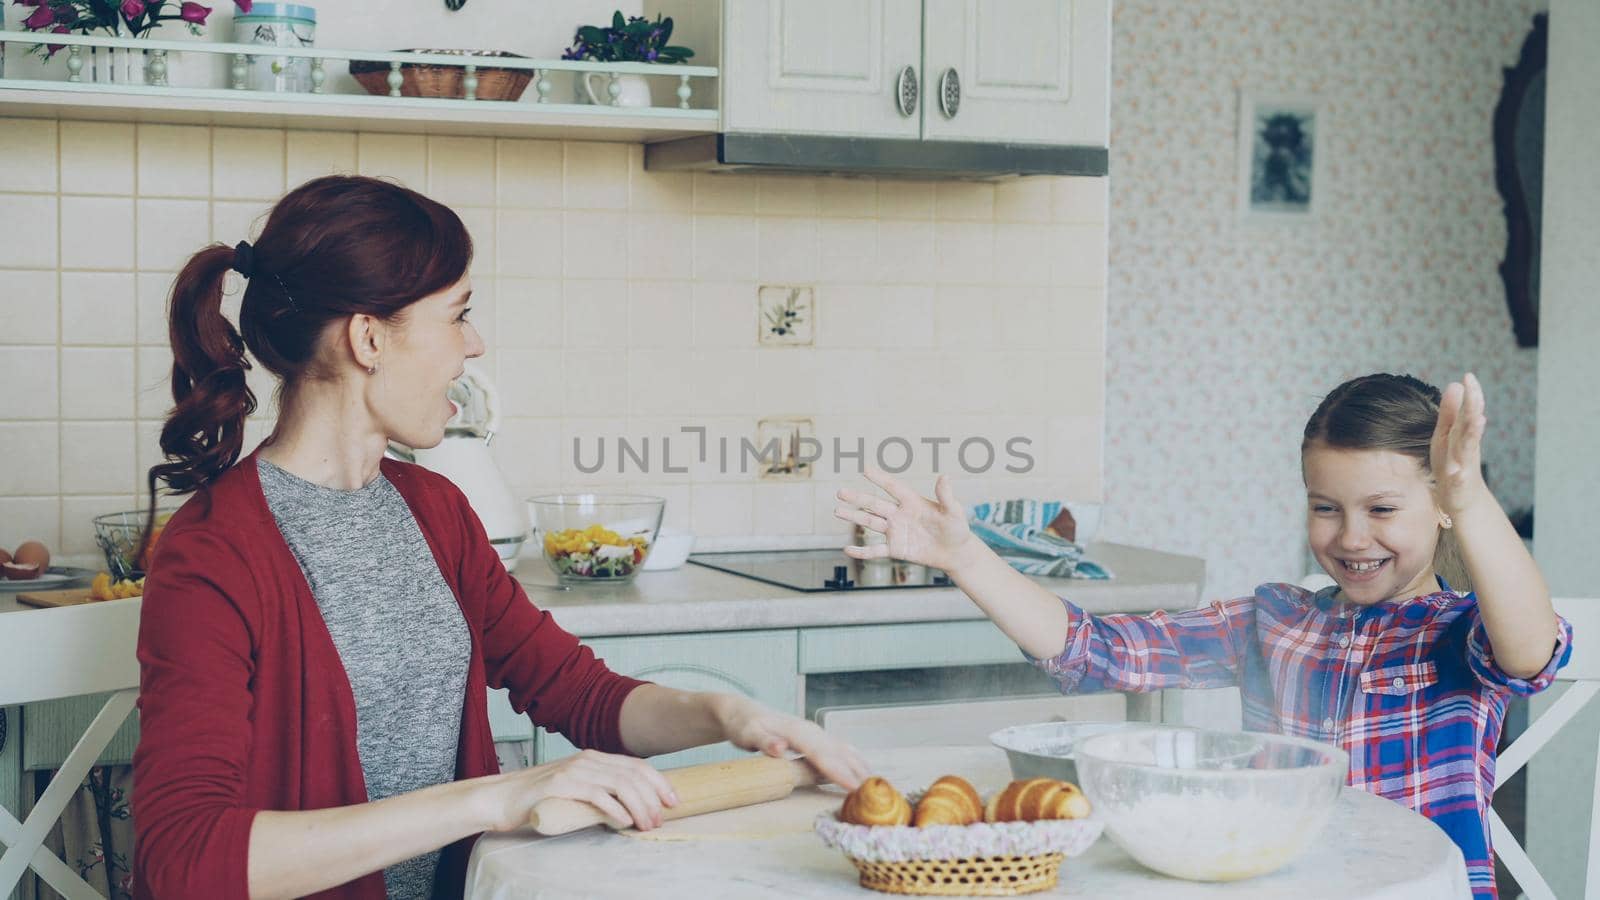 Young mother and cute daughter cooking together talking in the kitchen on weekend. Little girl clapping hands with flour and laughing. Family, food, home and people concept by silverkblack